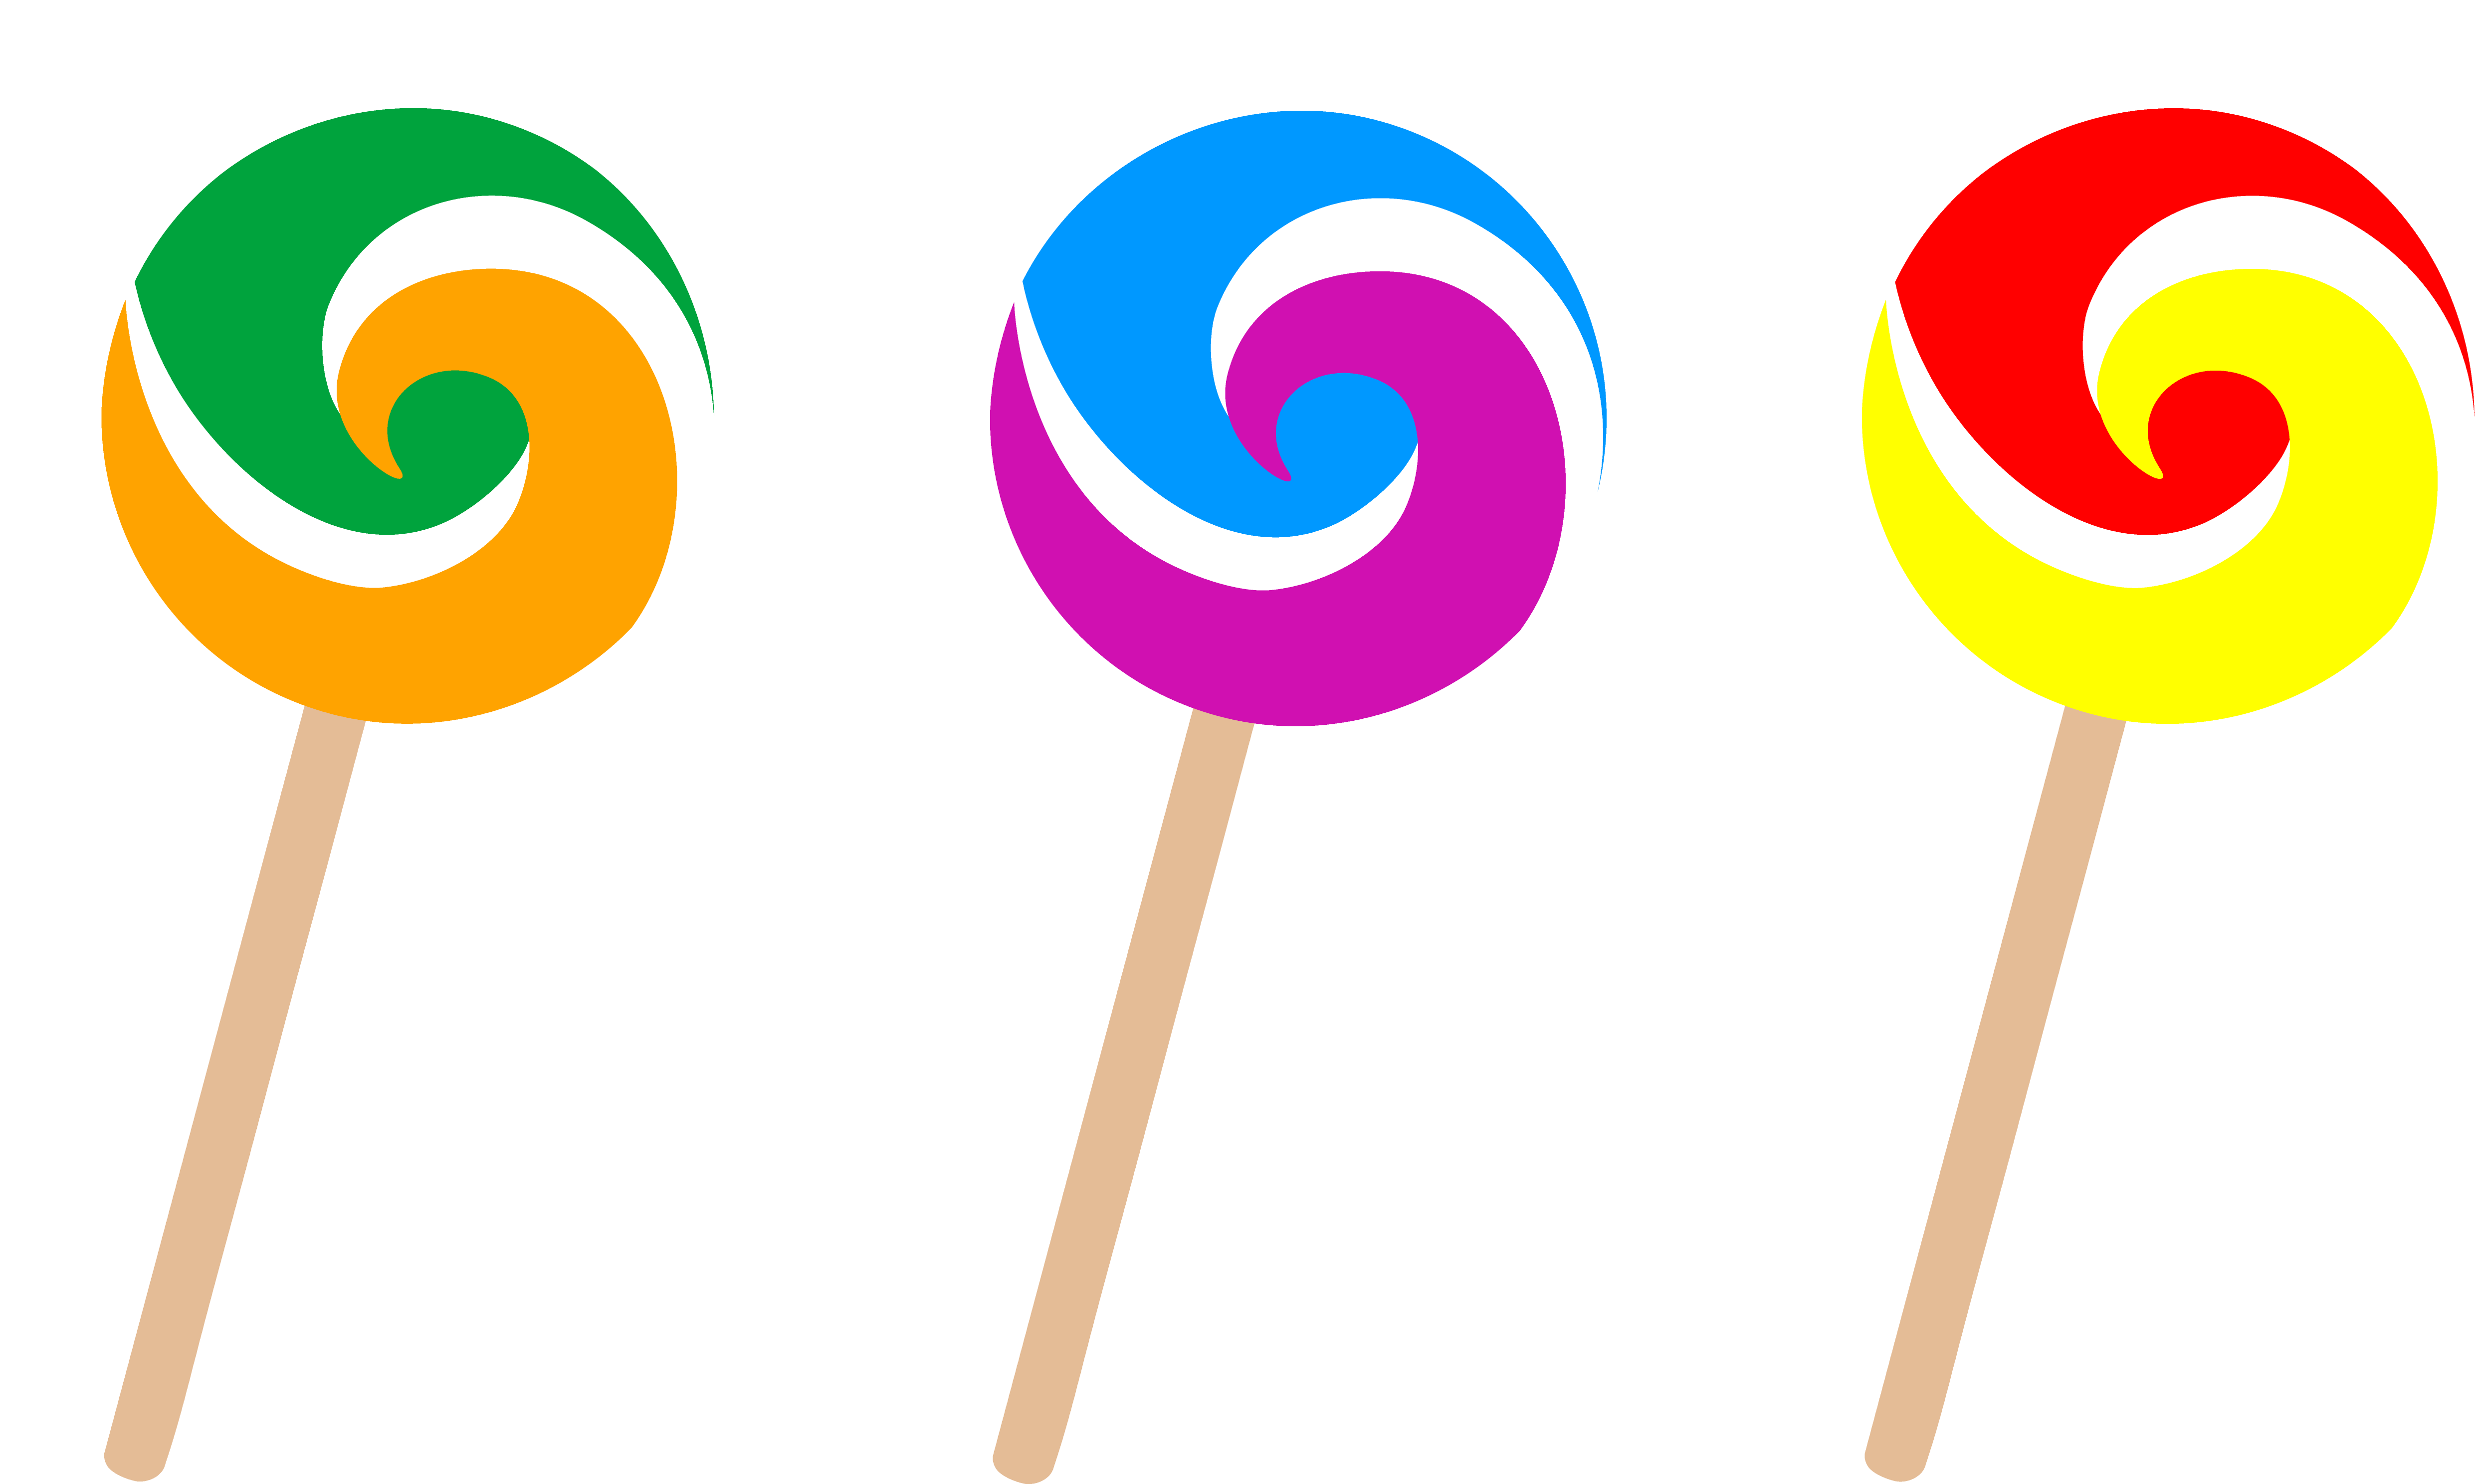 Candy clipart png